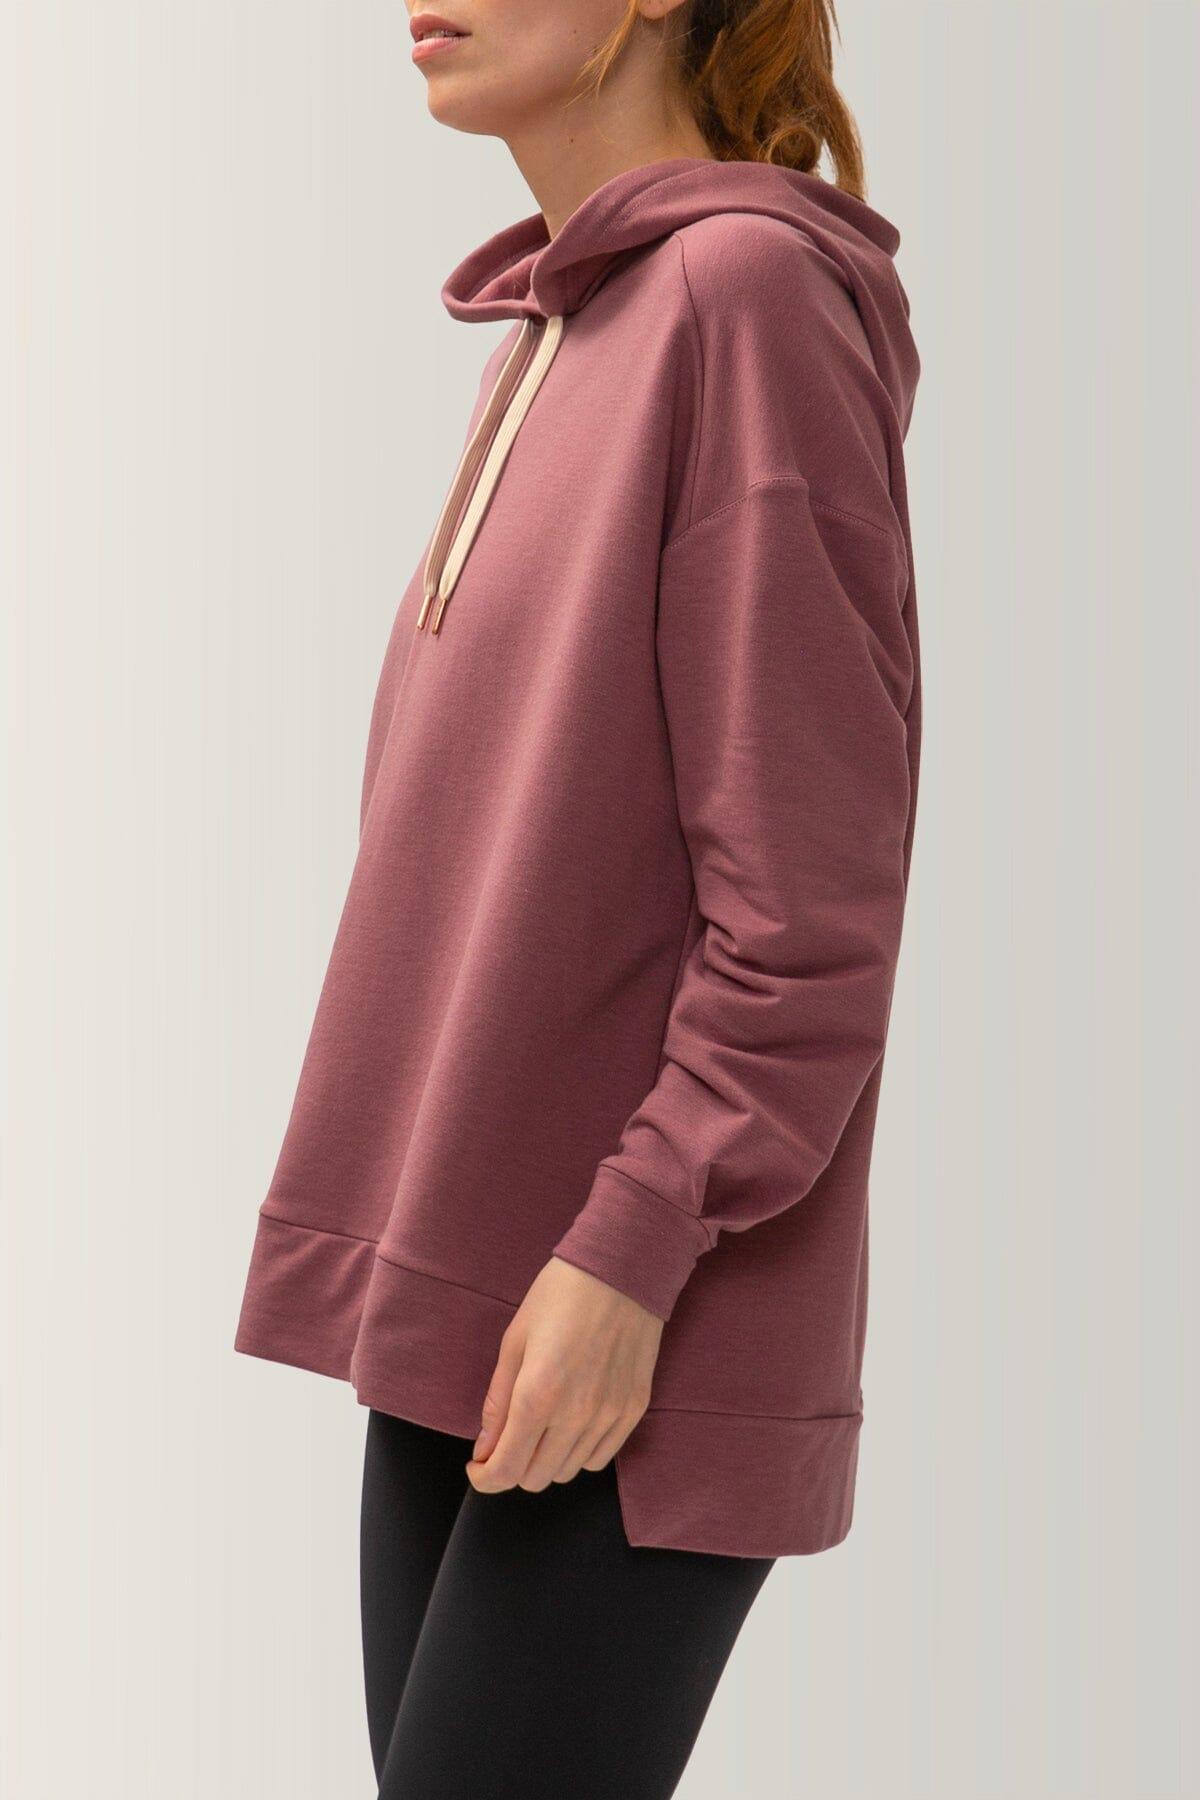 Femme qui porte le chandail Chill out de Rose Boreal./ Women wearing the Chill Out Hoodie by Rose Boreal. -Goddess